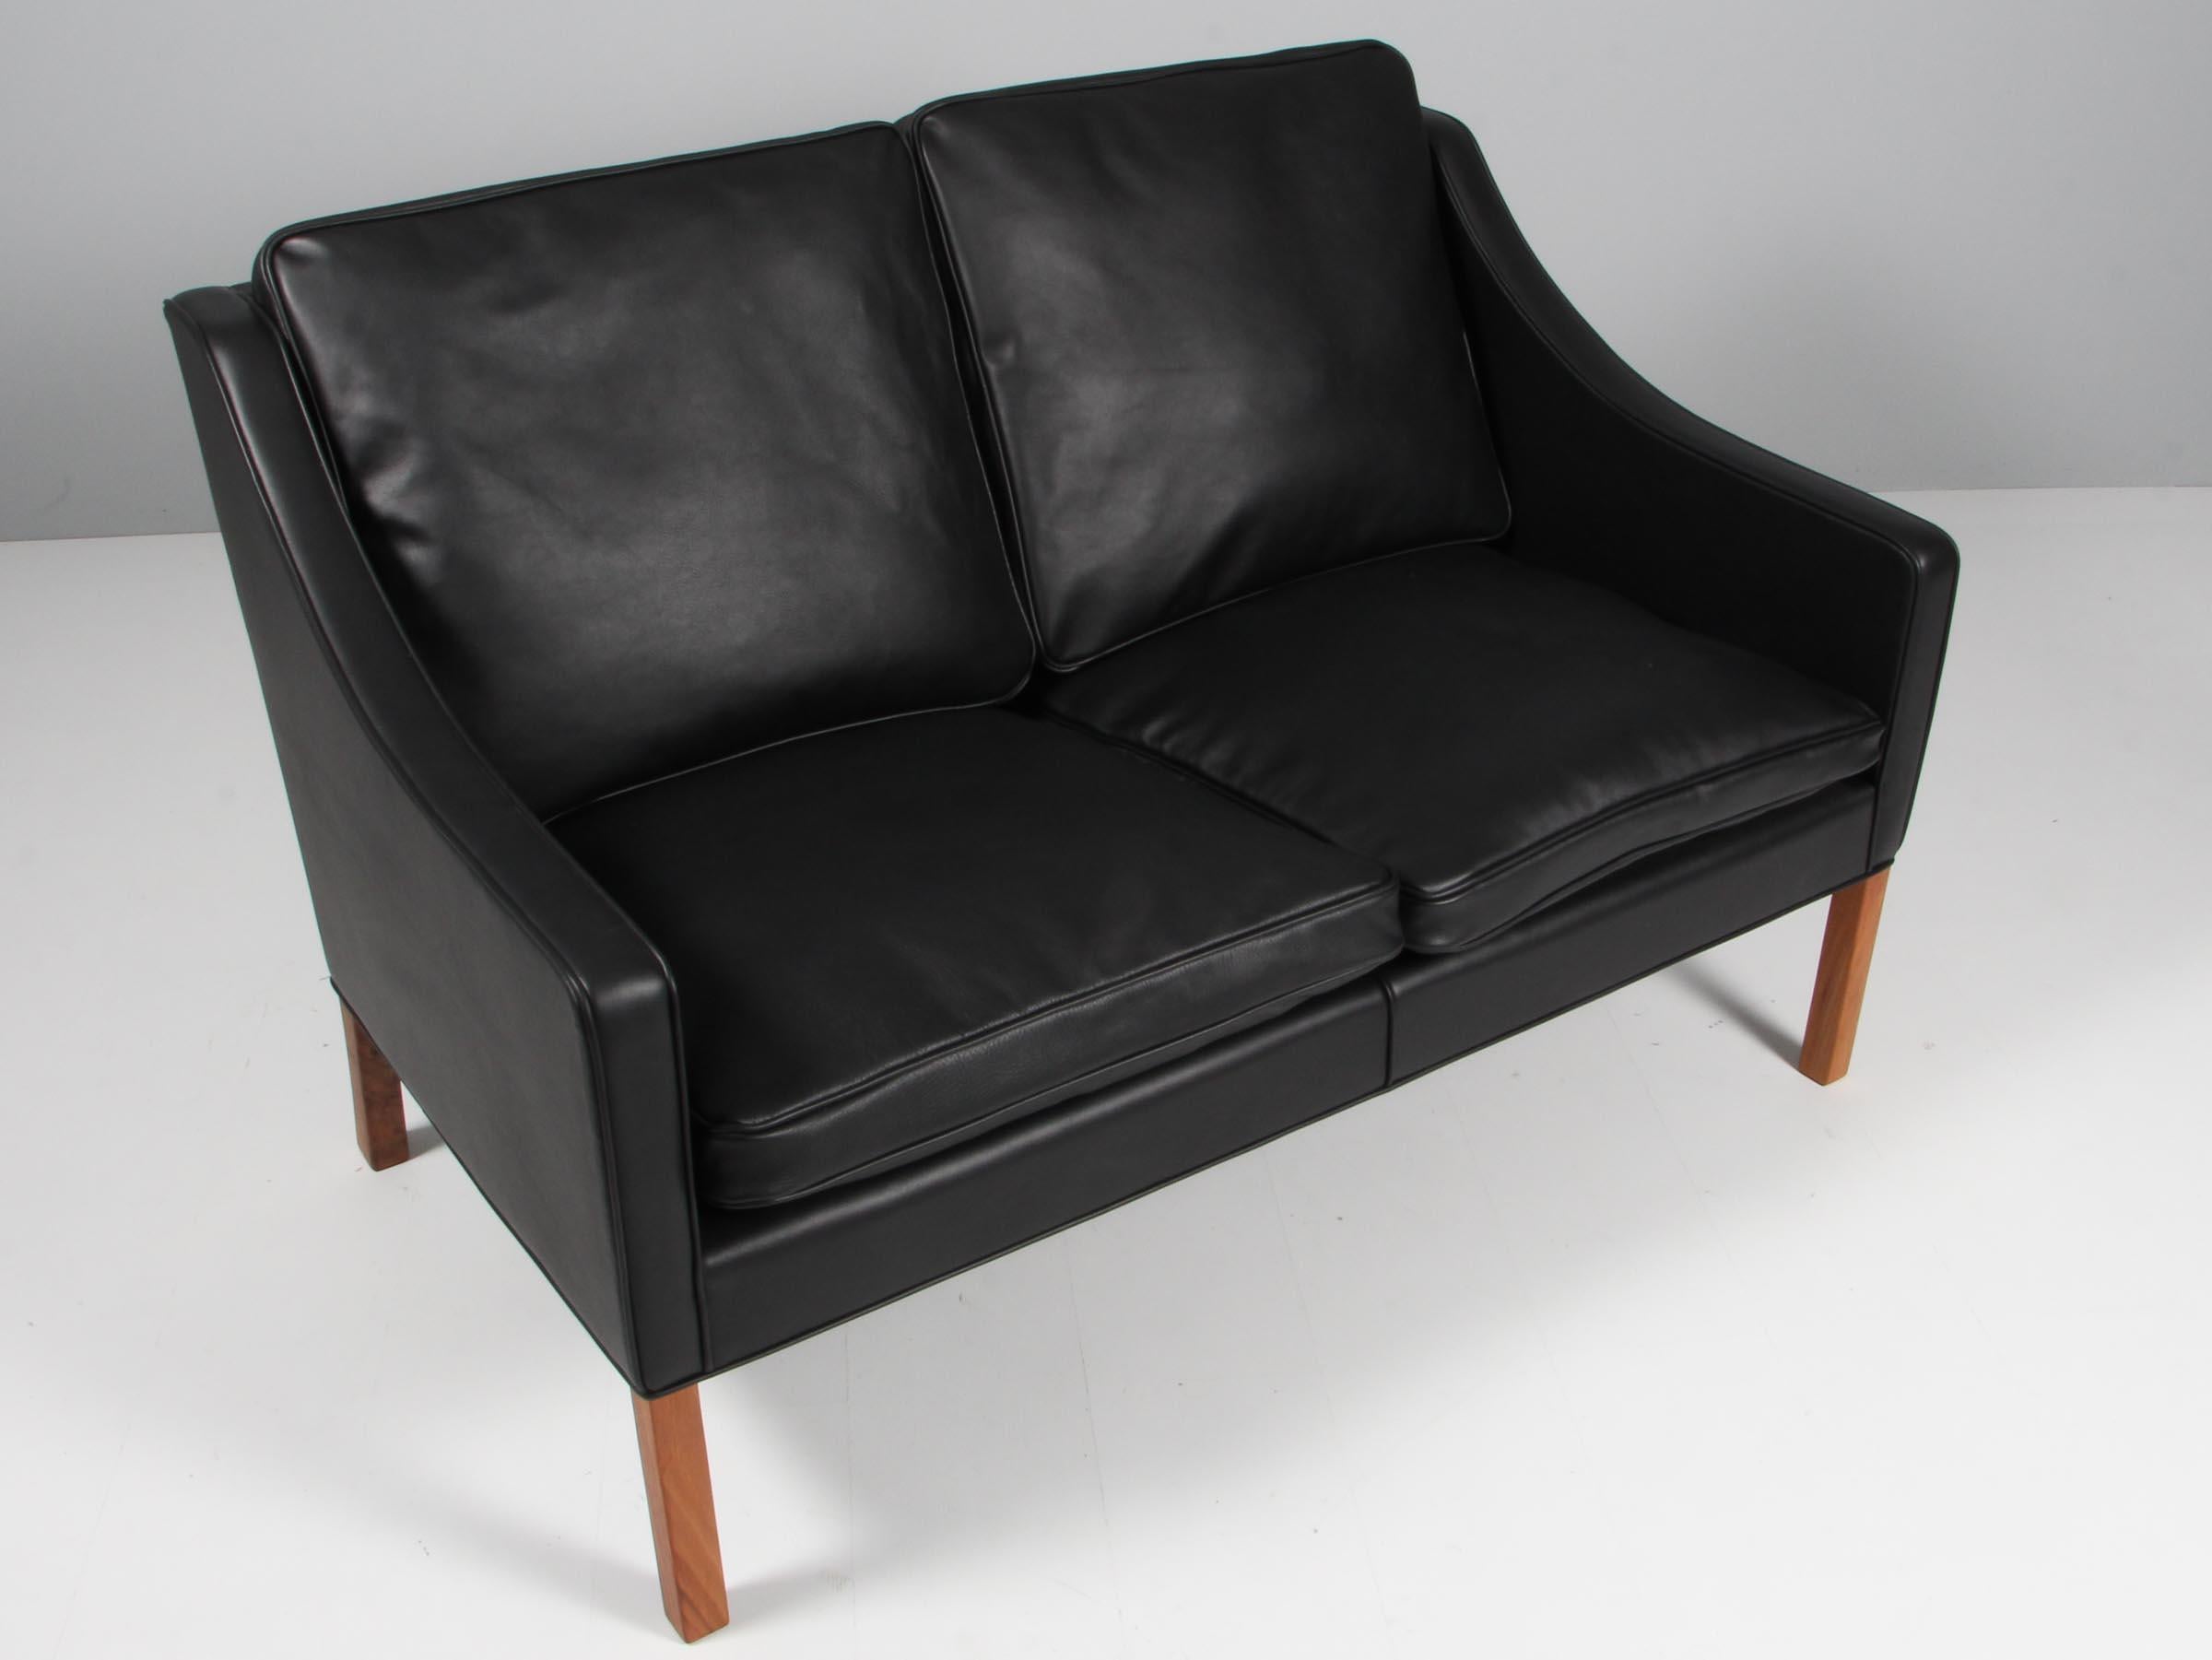 Børge Mogensen two-seat sofa new upholstery with black elegance aniline leather.

Legs of teak.

Model 2208, made by Fredericia furniture.